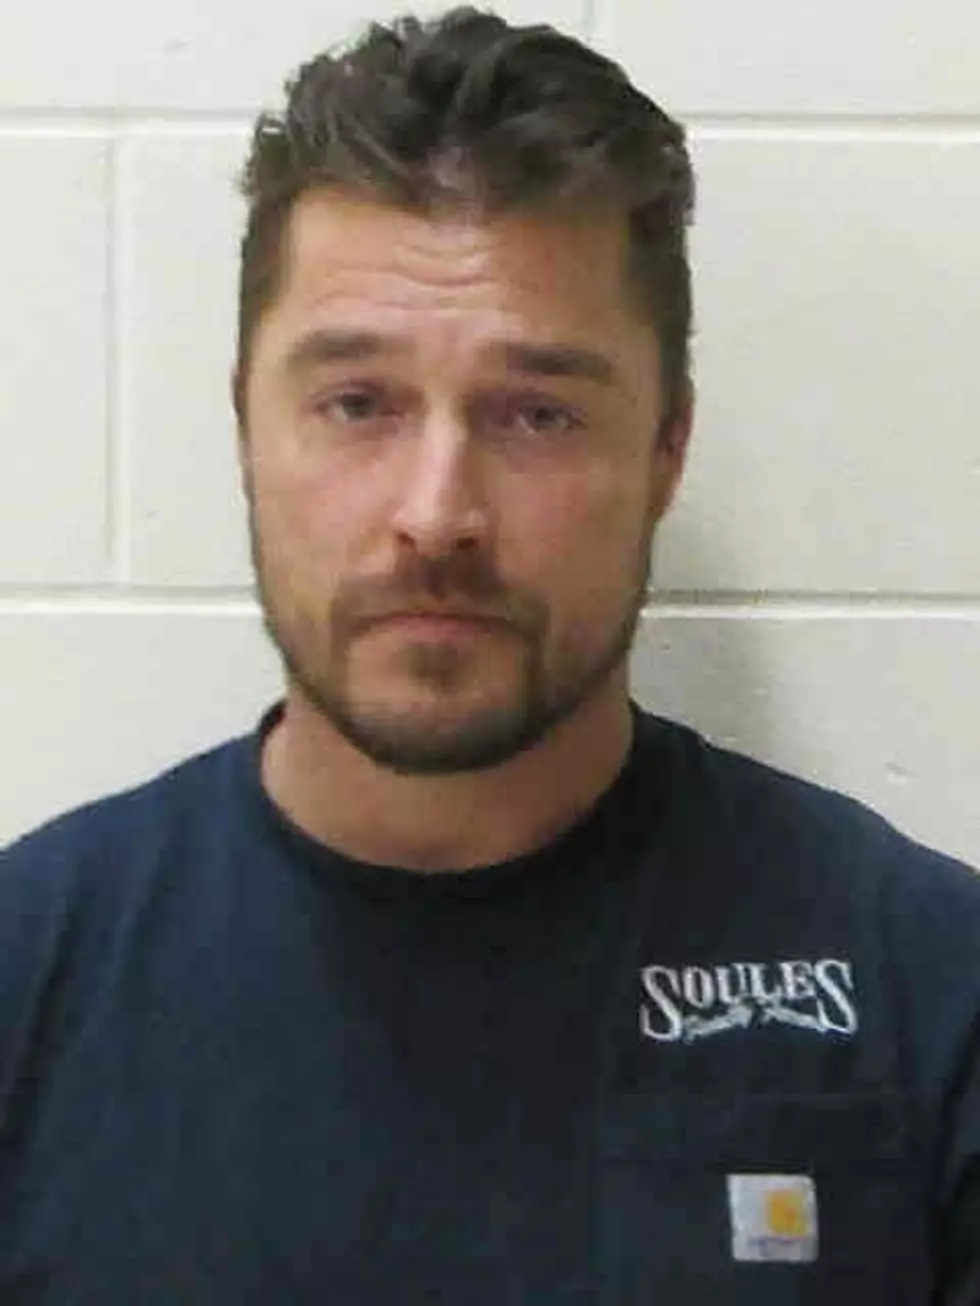 Sentencing In Chris Soules Trial Moved To Late May